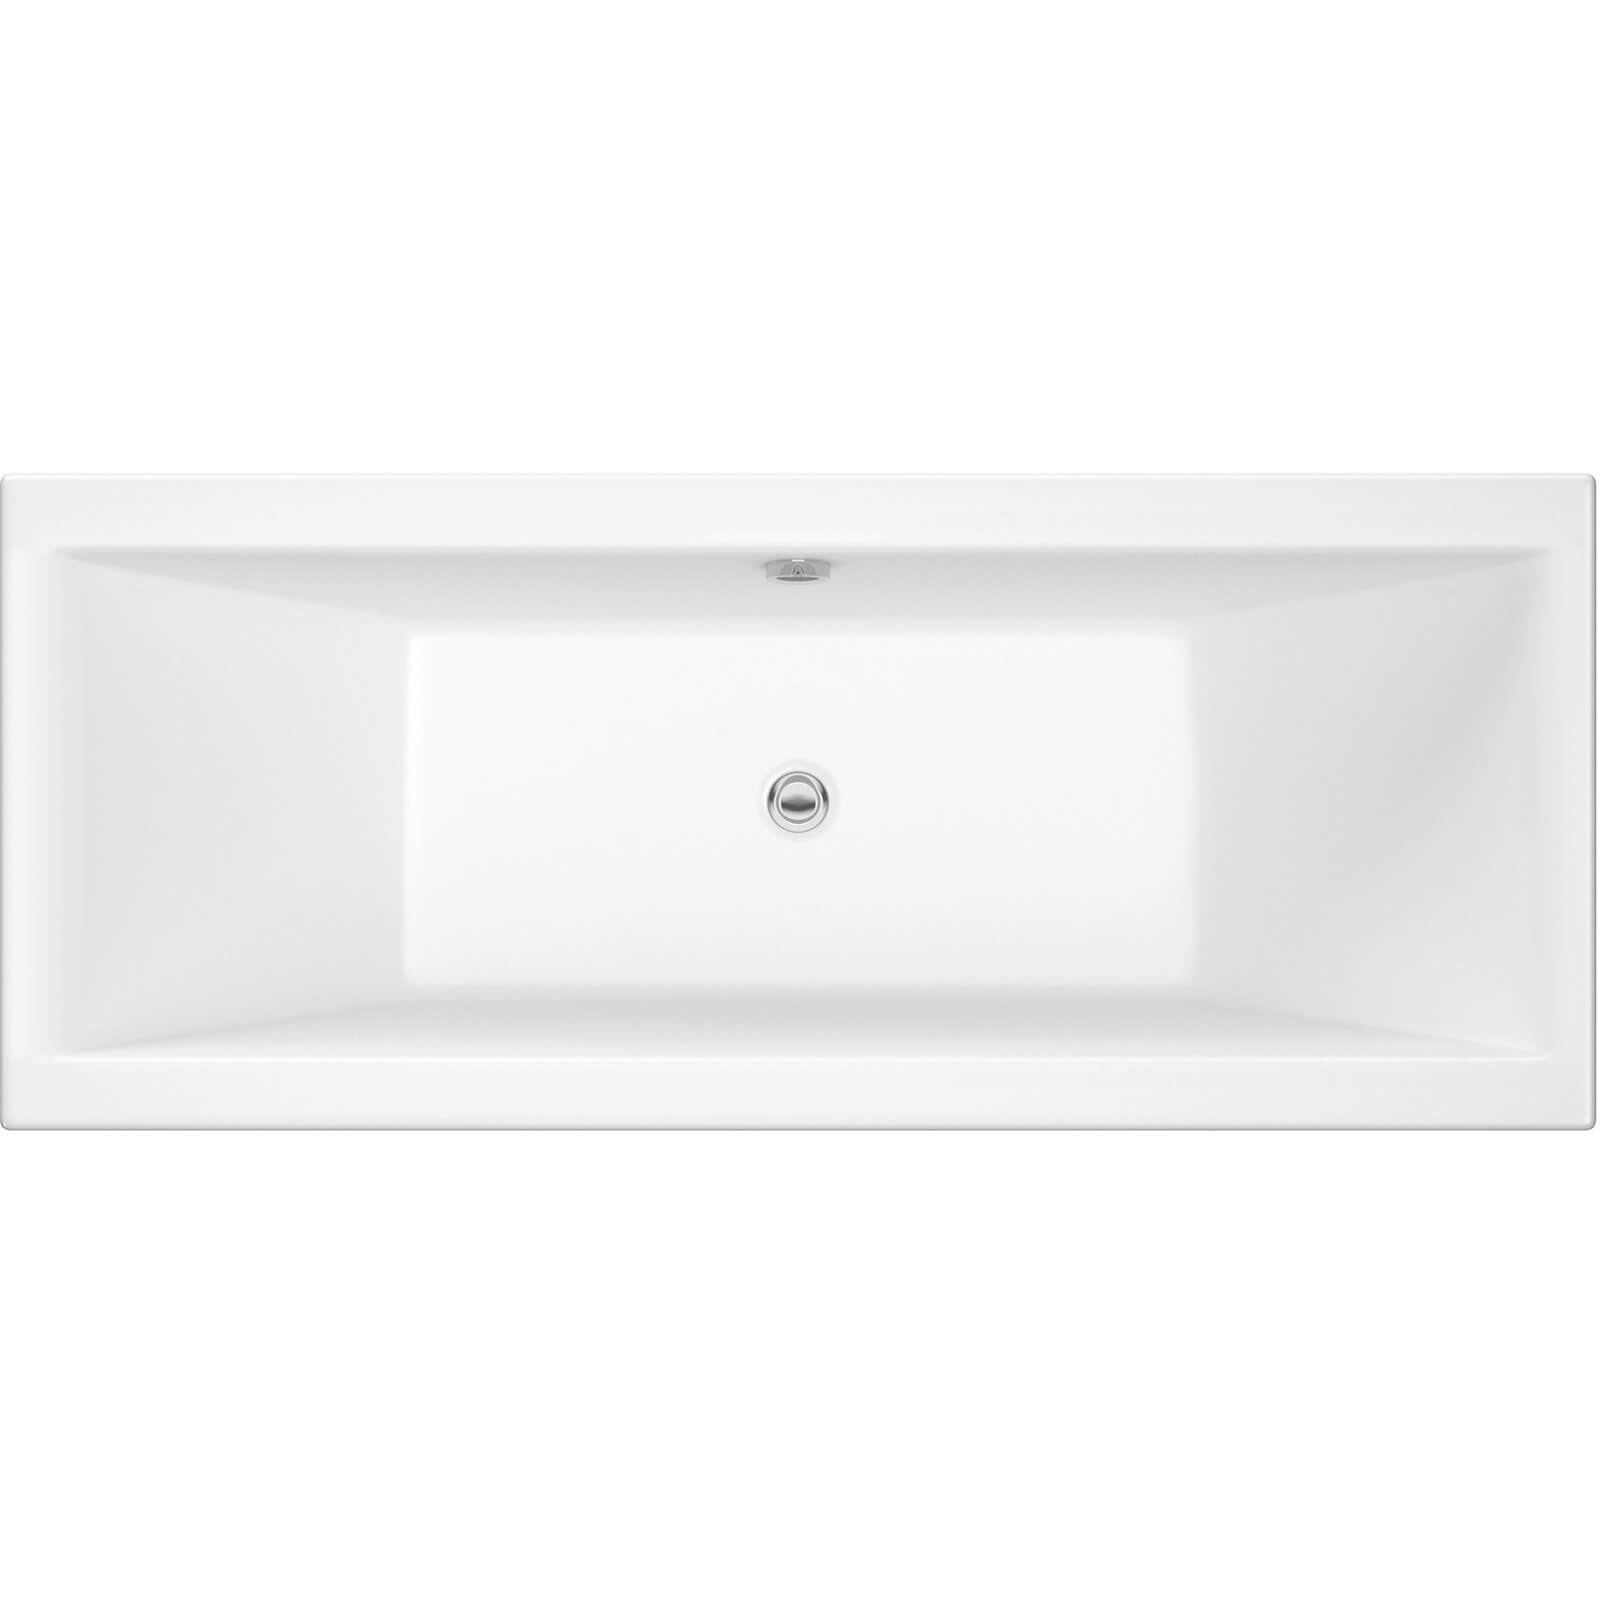 Balterley Square Double Ended Bath - 1700 x 750mm